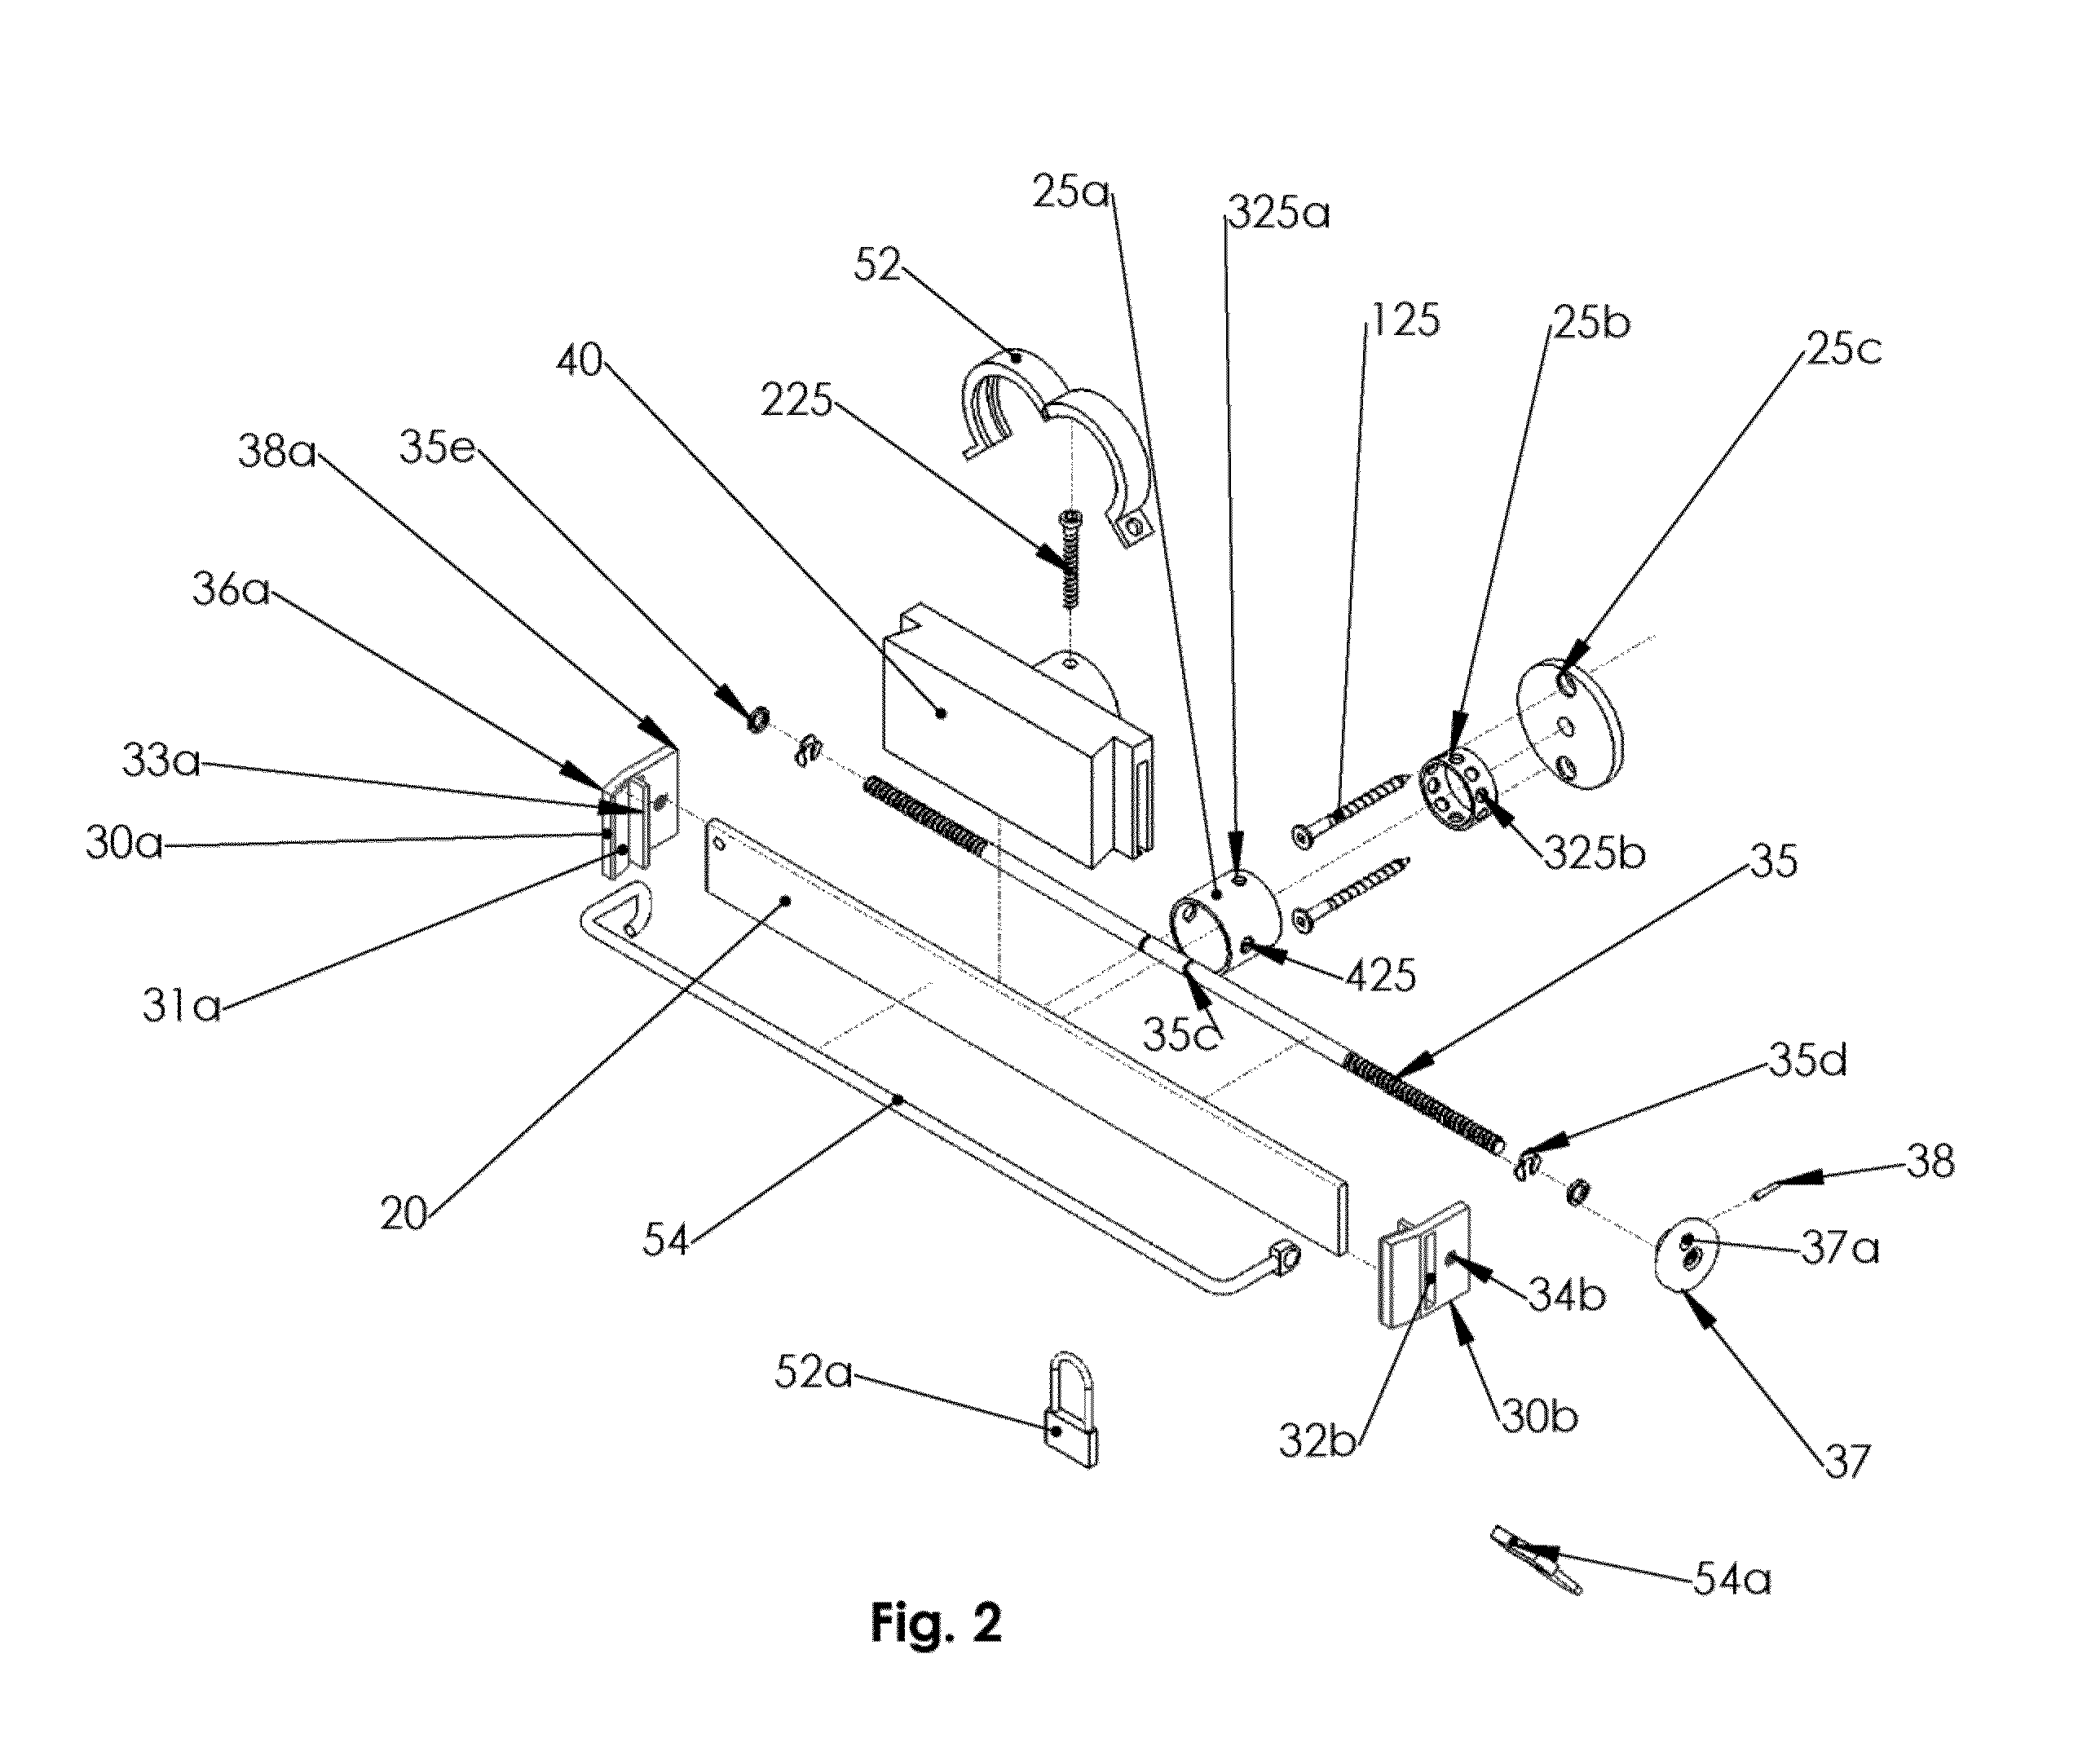 Sports equipment rack, systems and methods of storing or displaying sports equipment